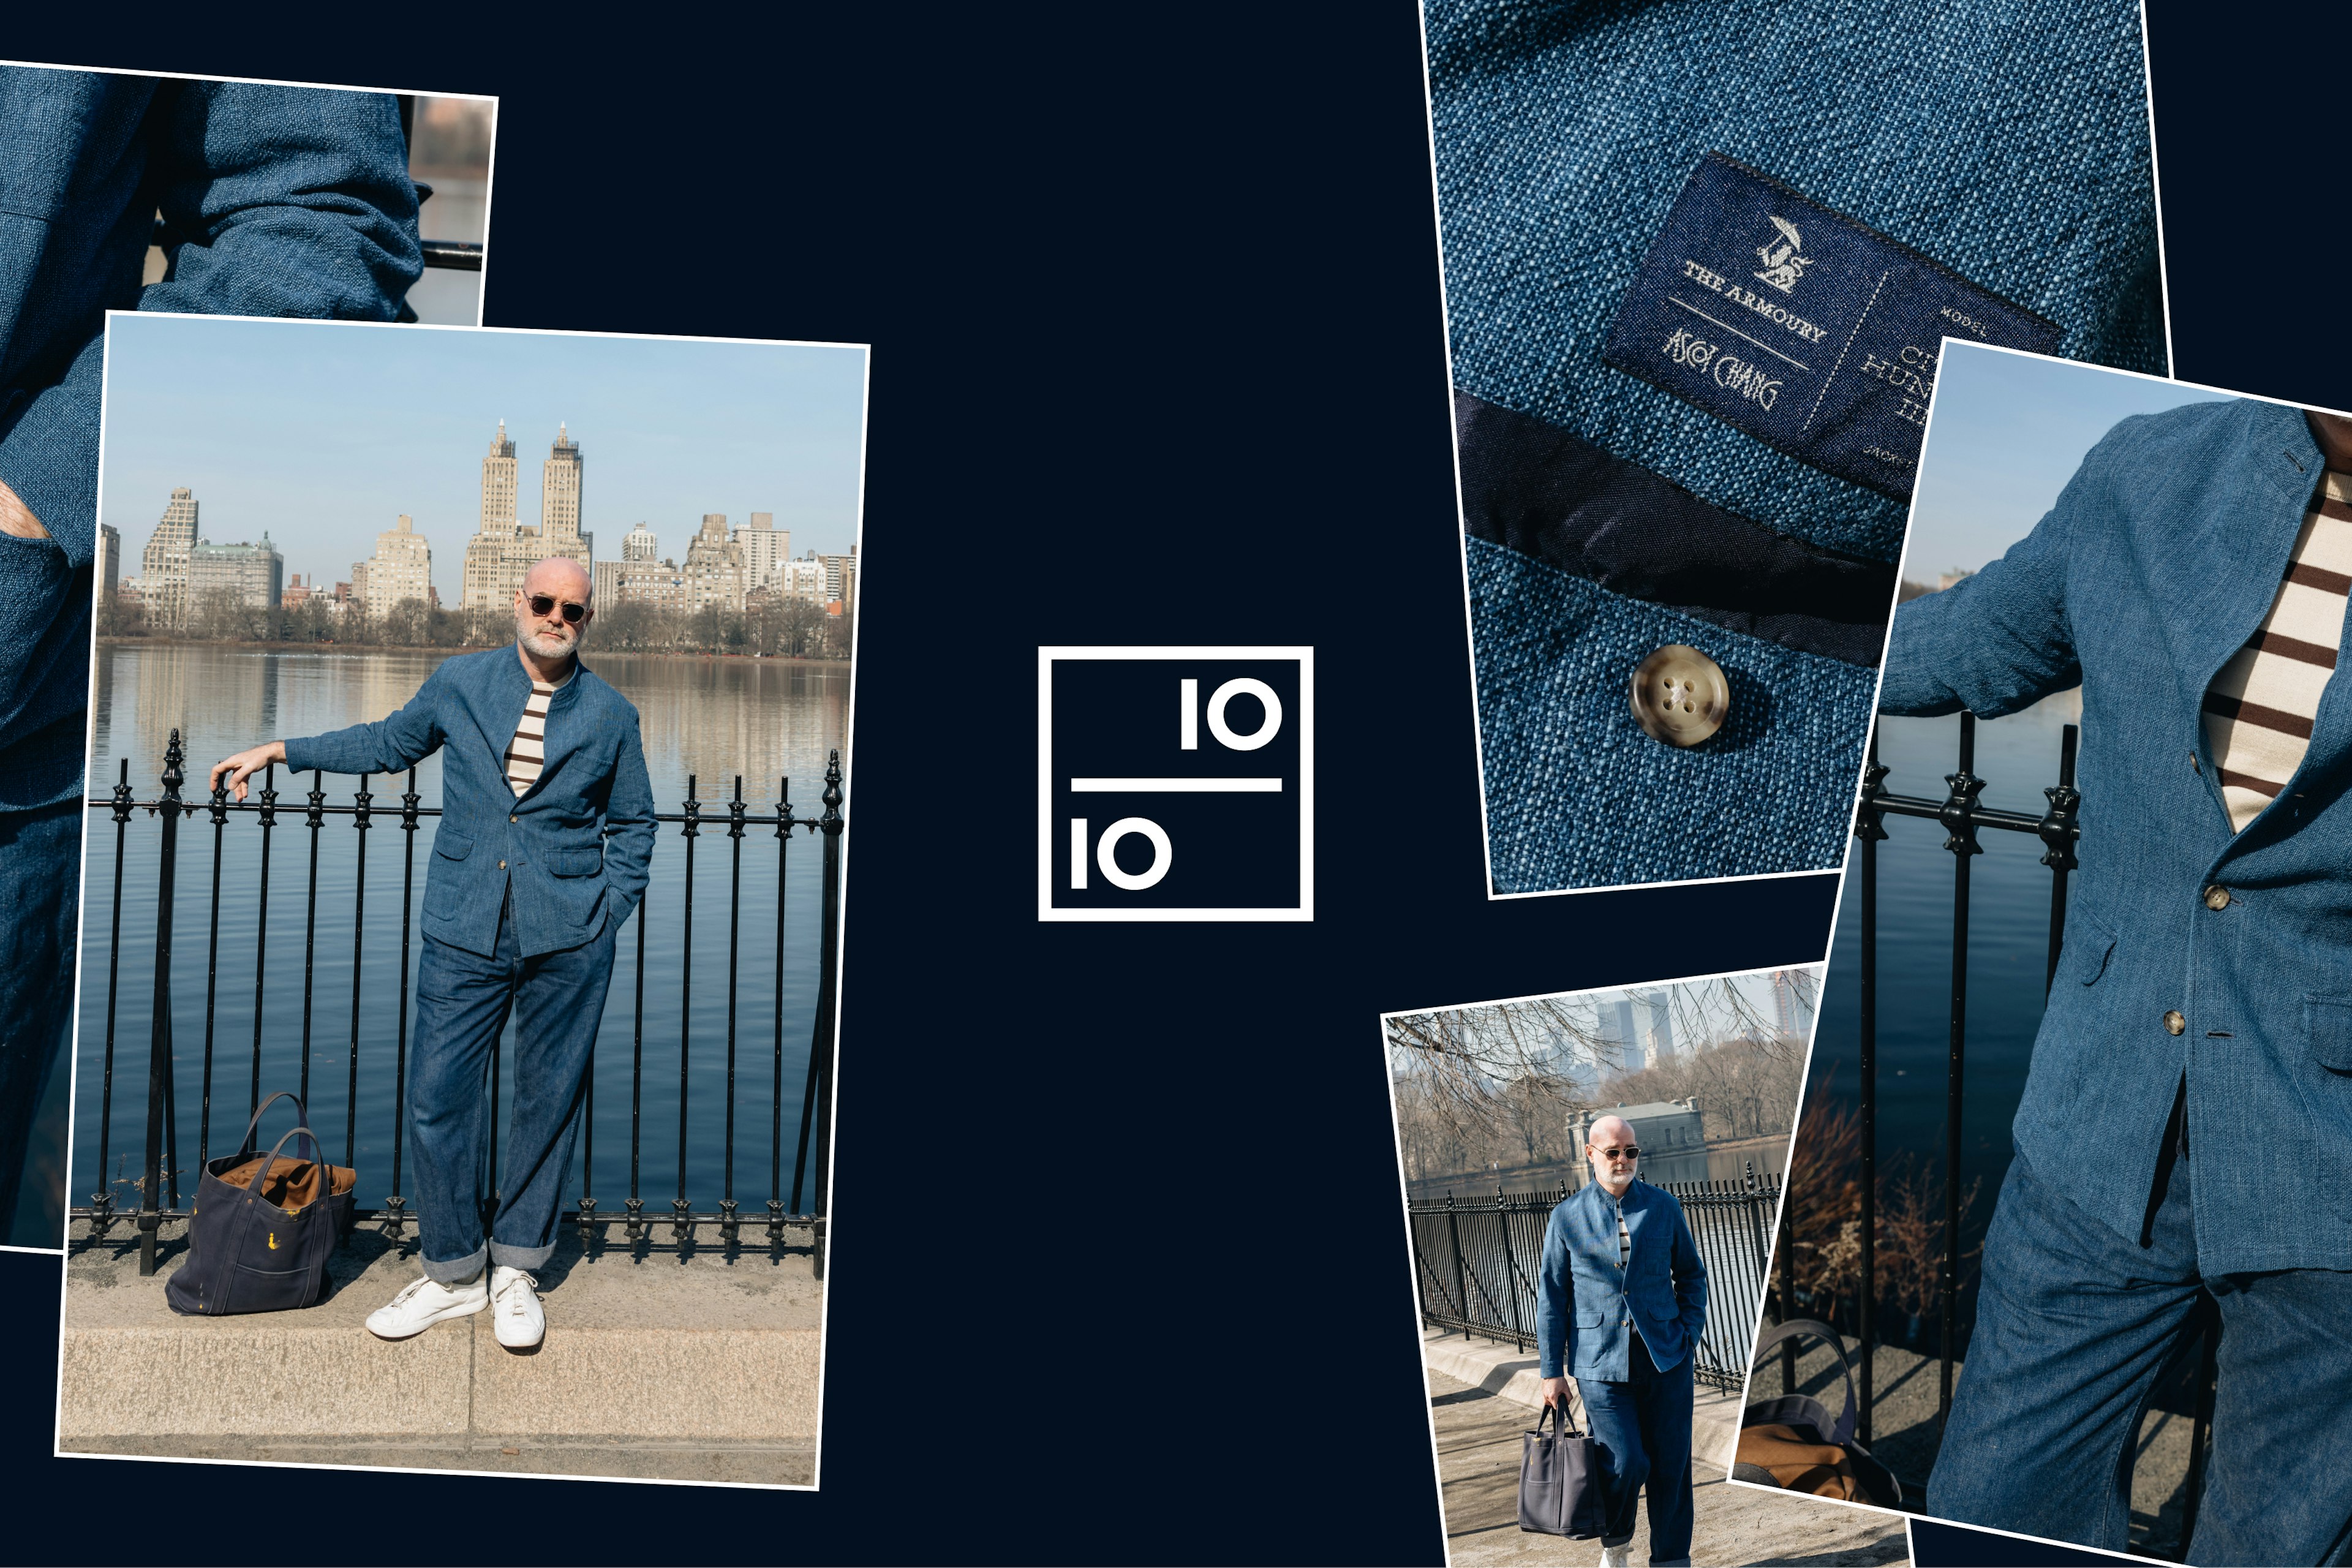 A Jacket Built for the City | 10 for 10